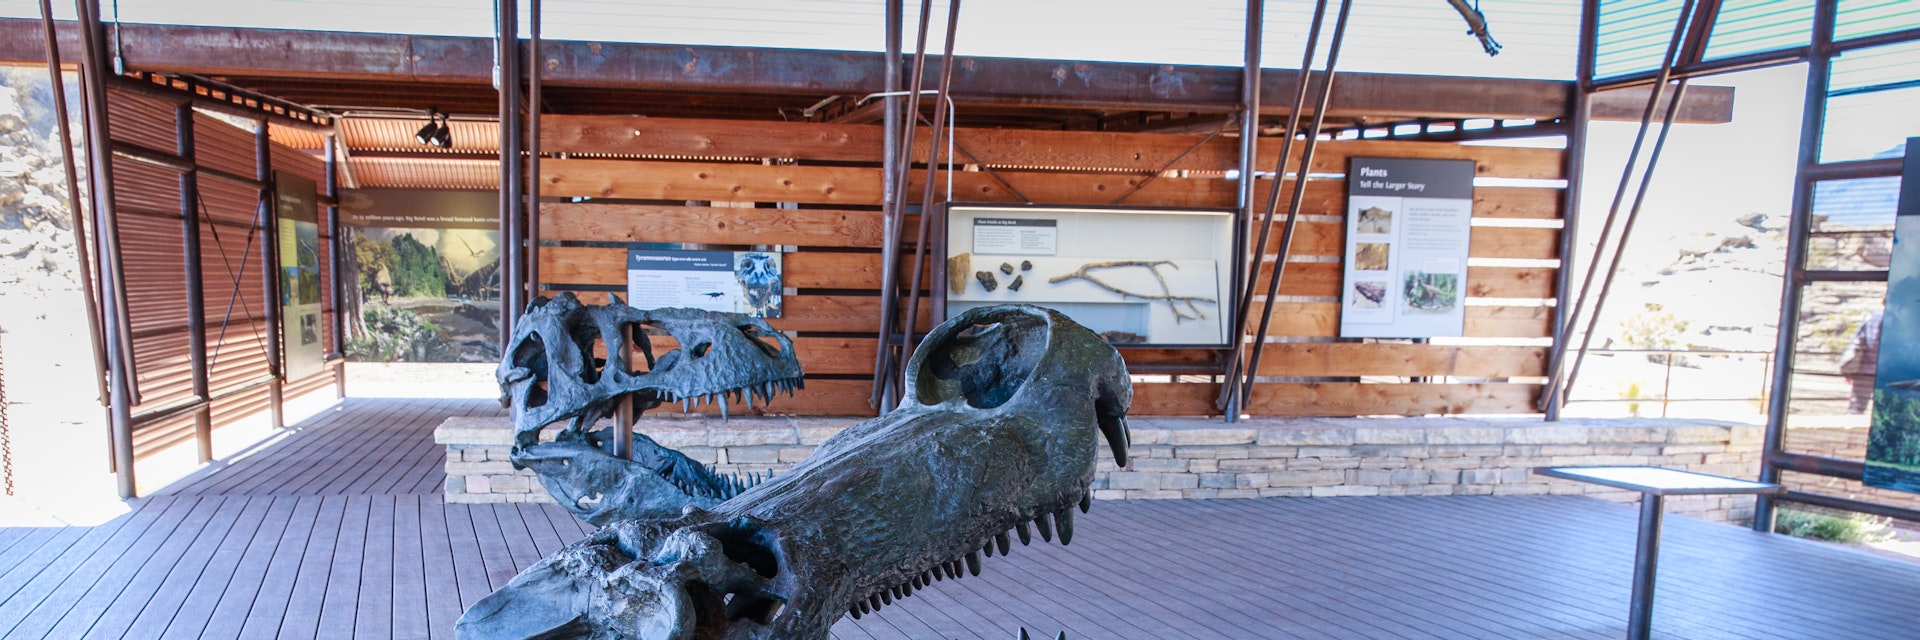 The Fossil Discovery Exhibit at Big Bend National Park.